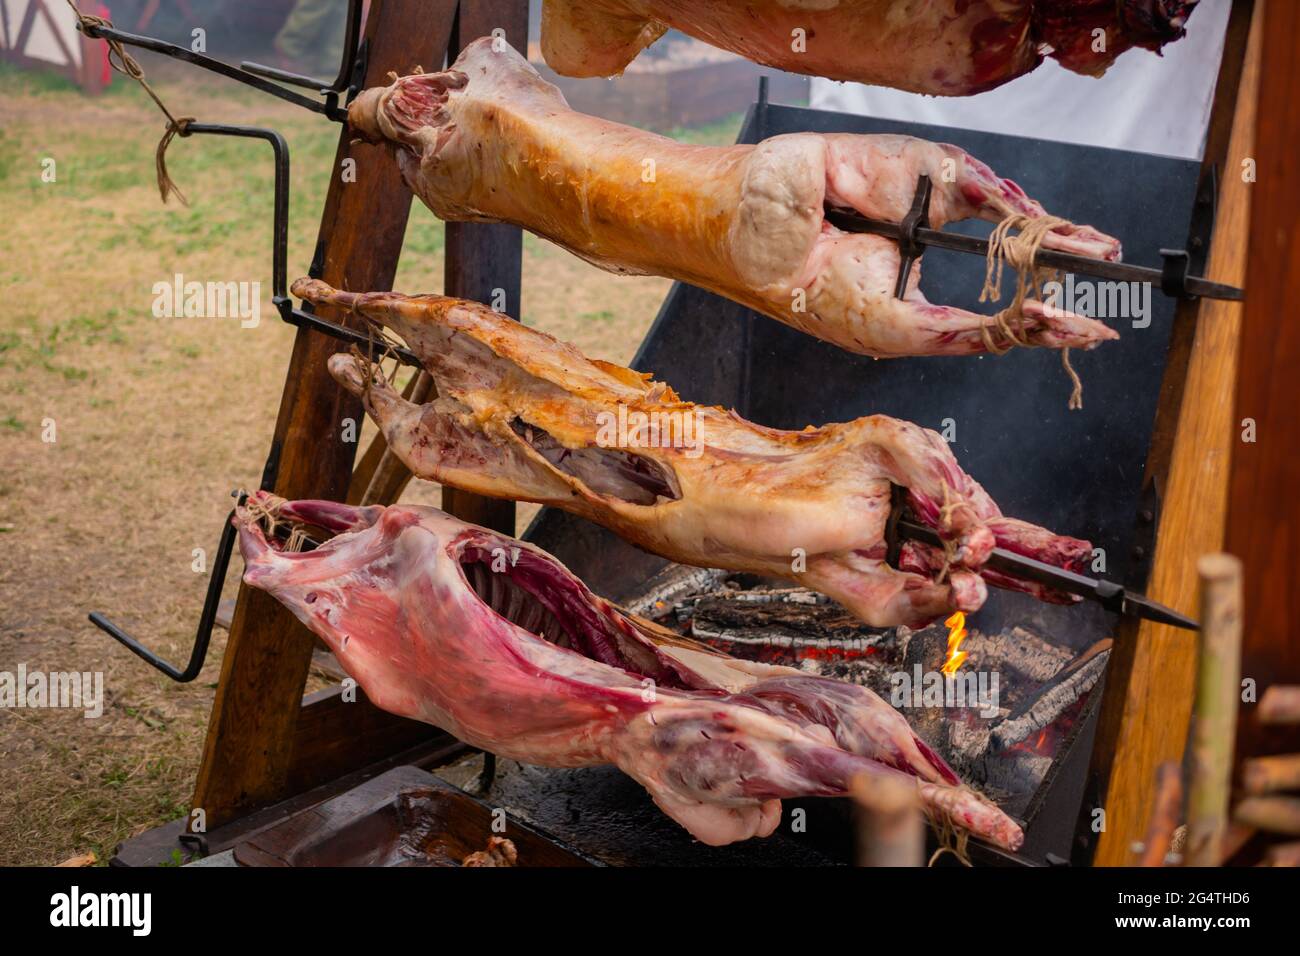 Process of cooking pork carcasses on spit at summer street food market Stock Photo